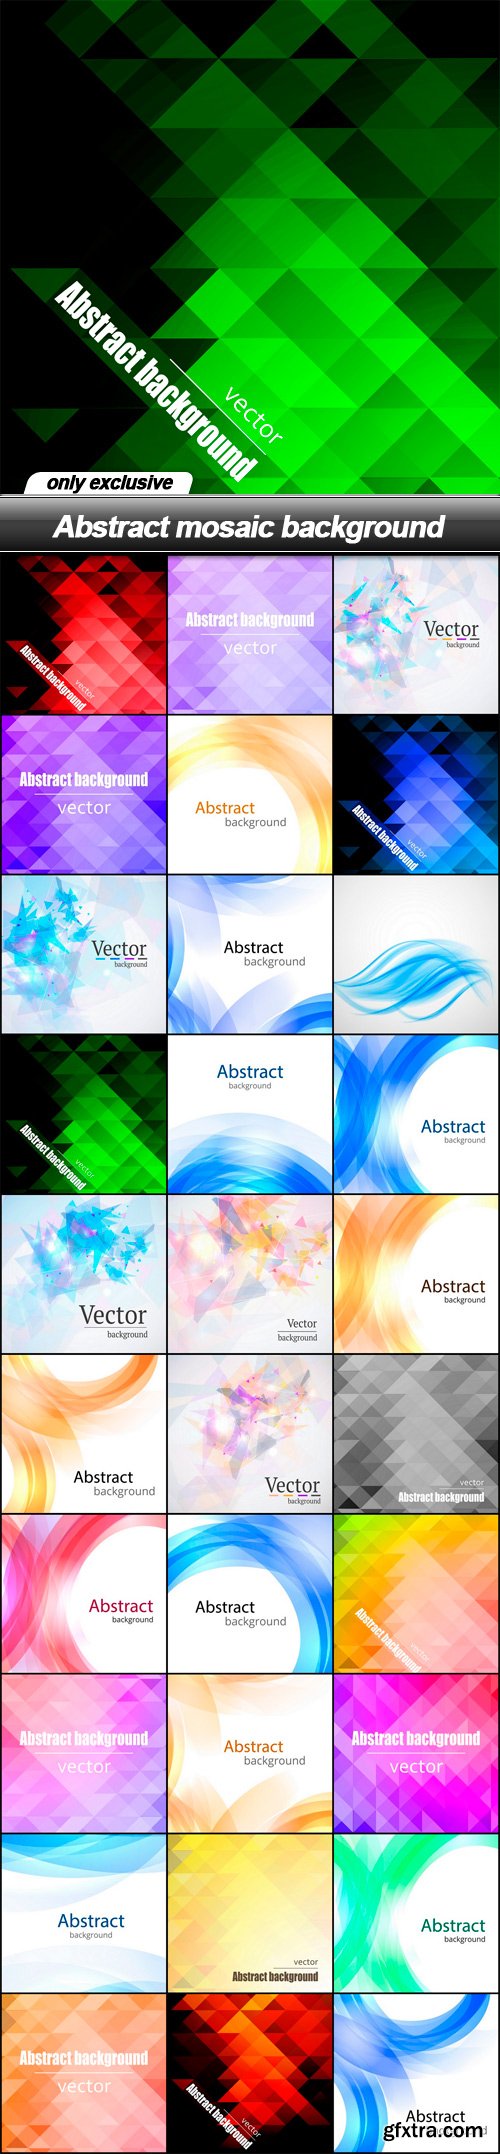 Abstract mosaic background - 30 EPS